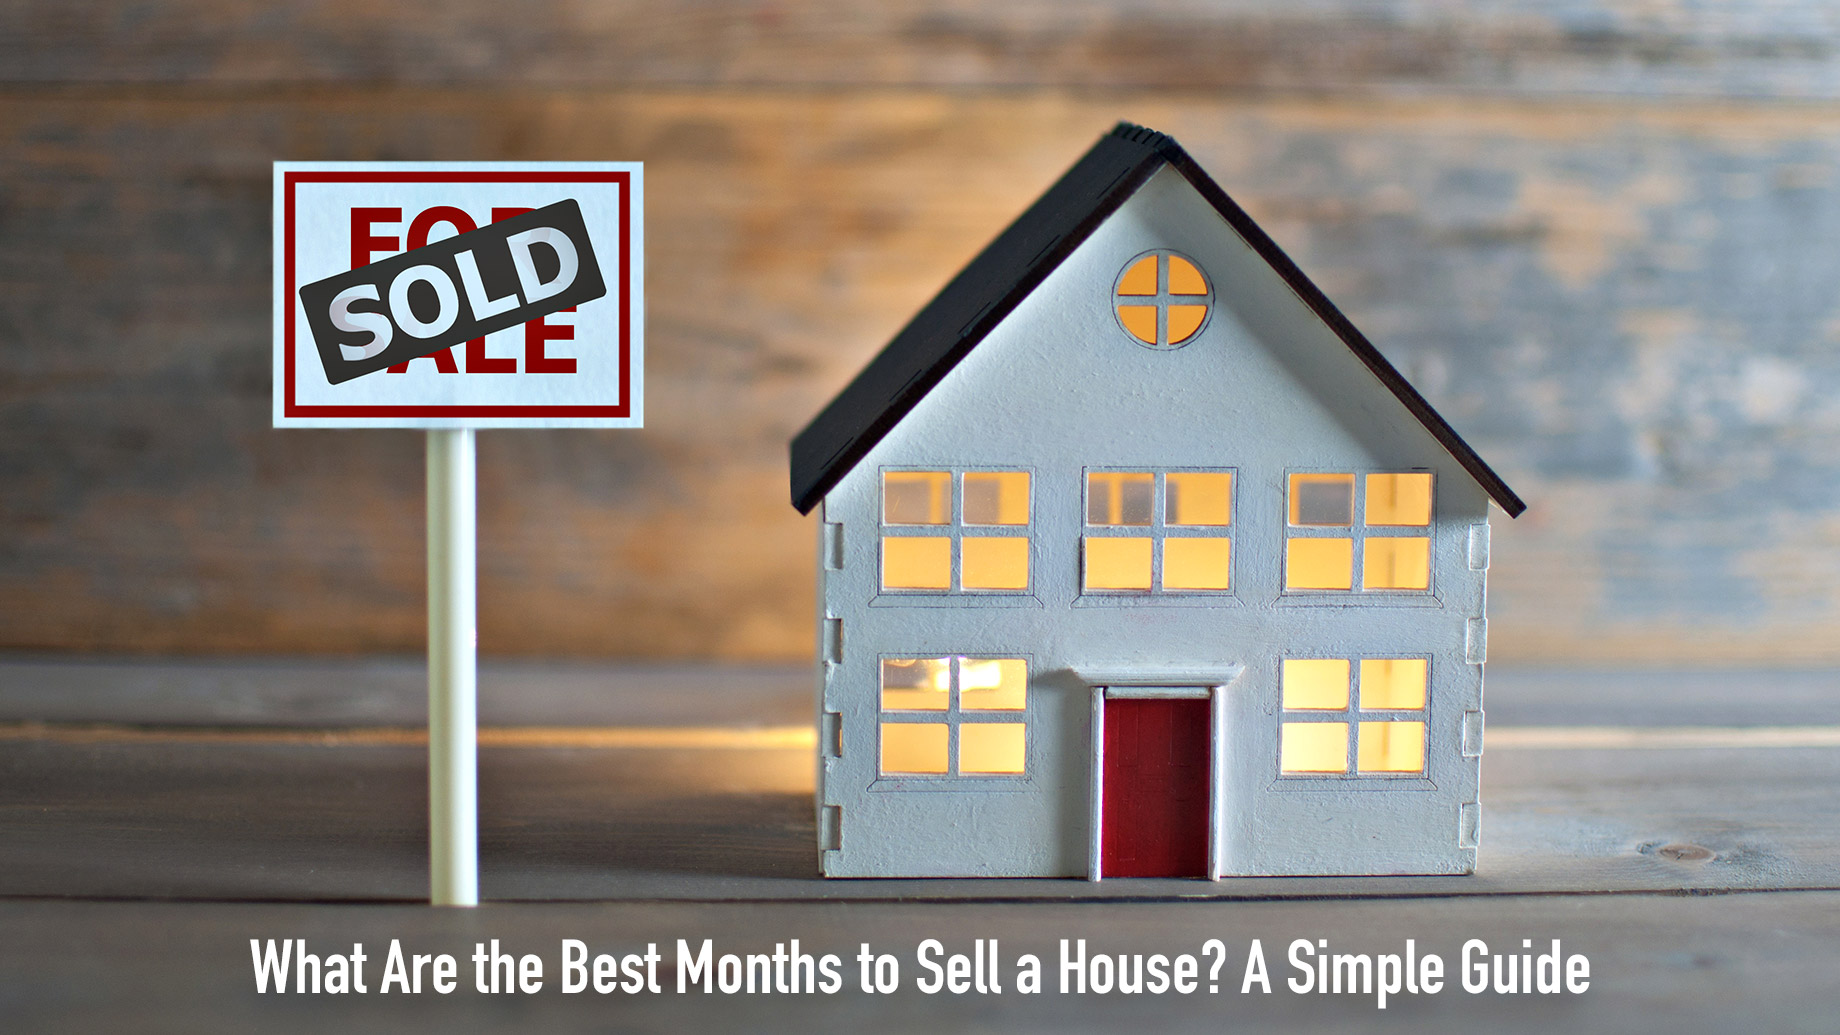 What Are the Best Months to Sell a House? A Simple Guide